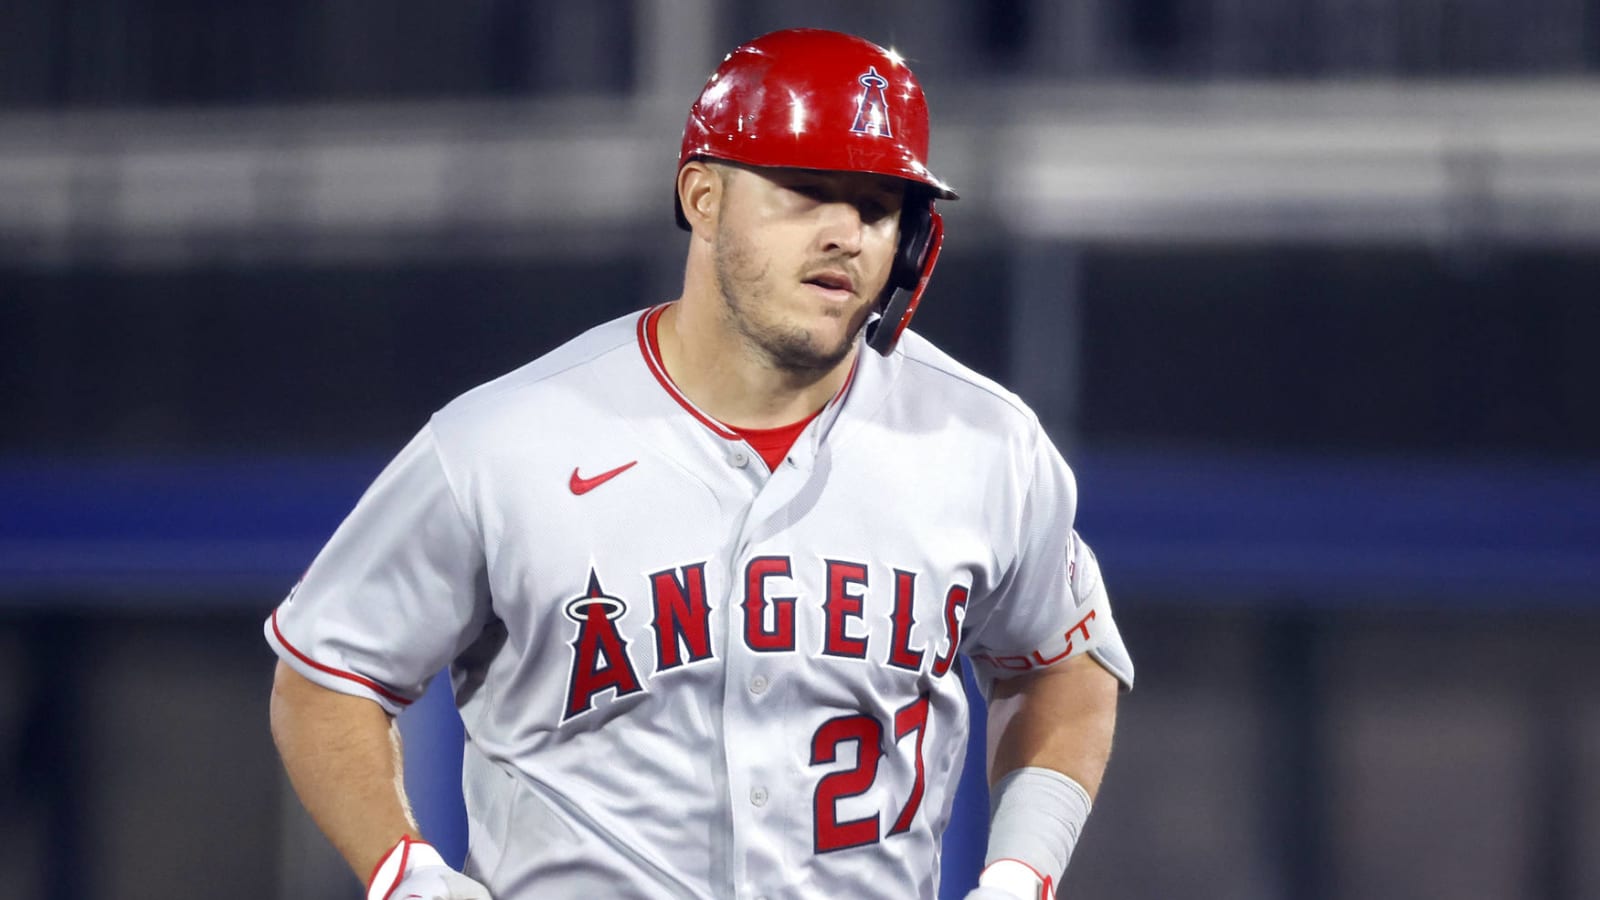 Mike Trout hit a home run into an elementary school